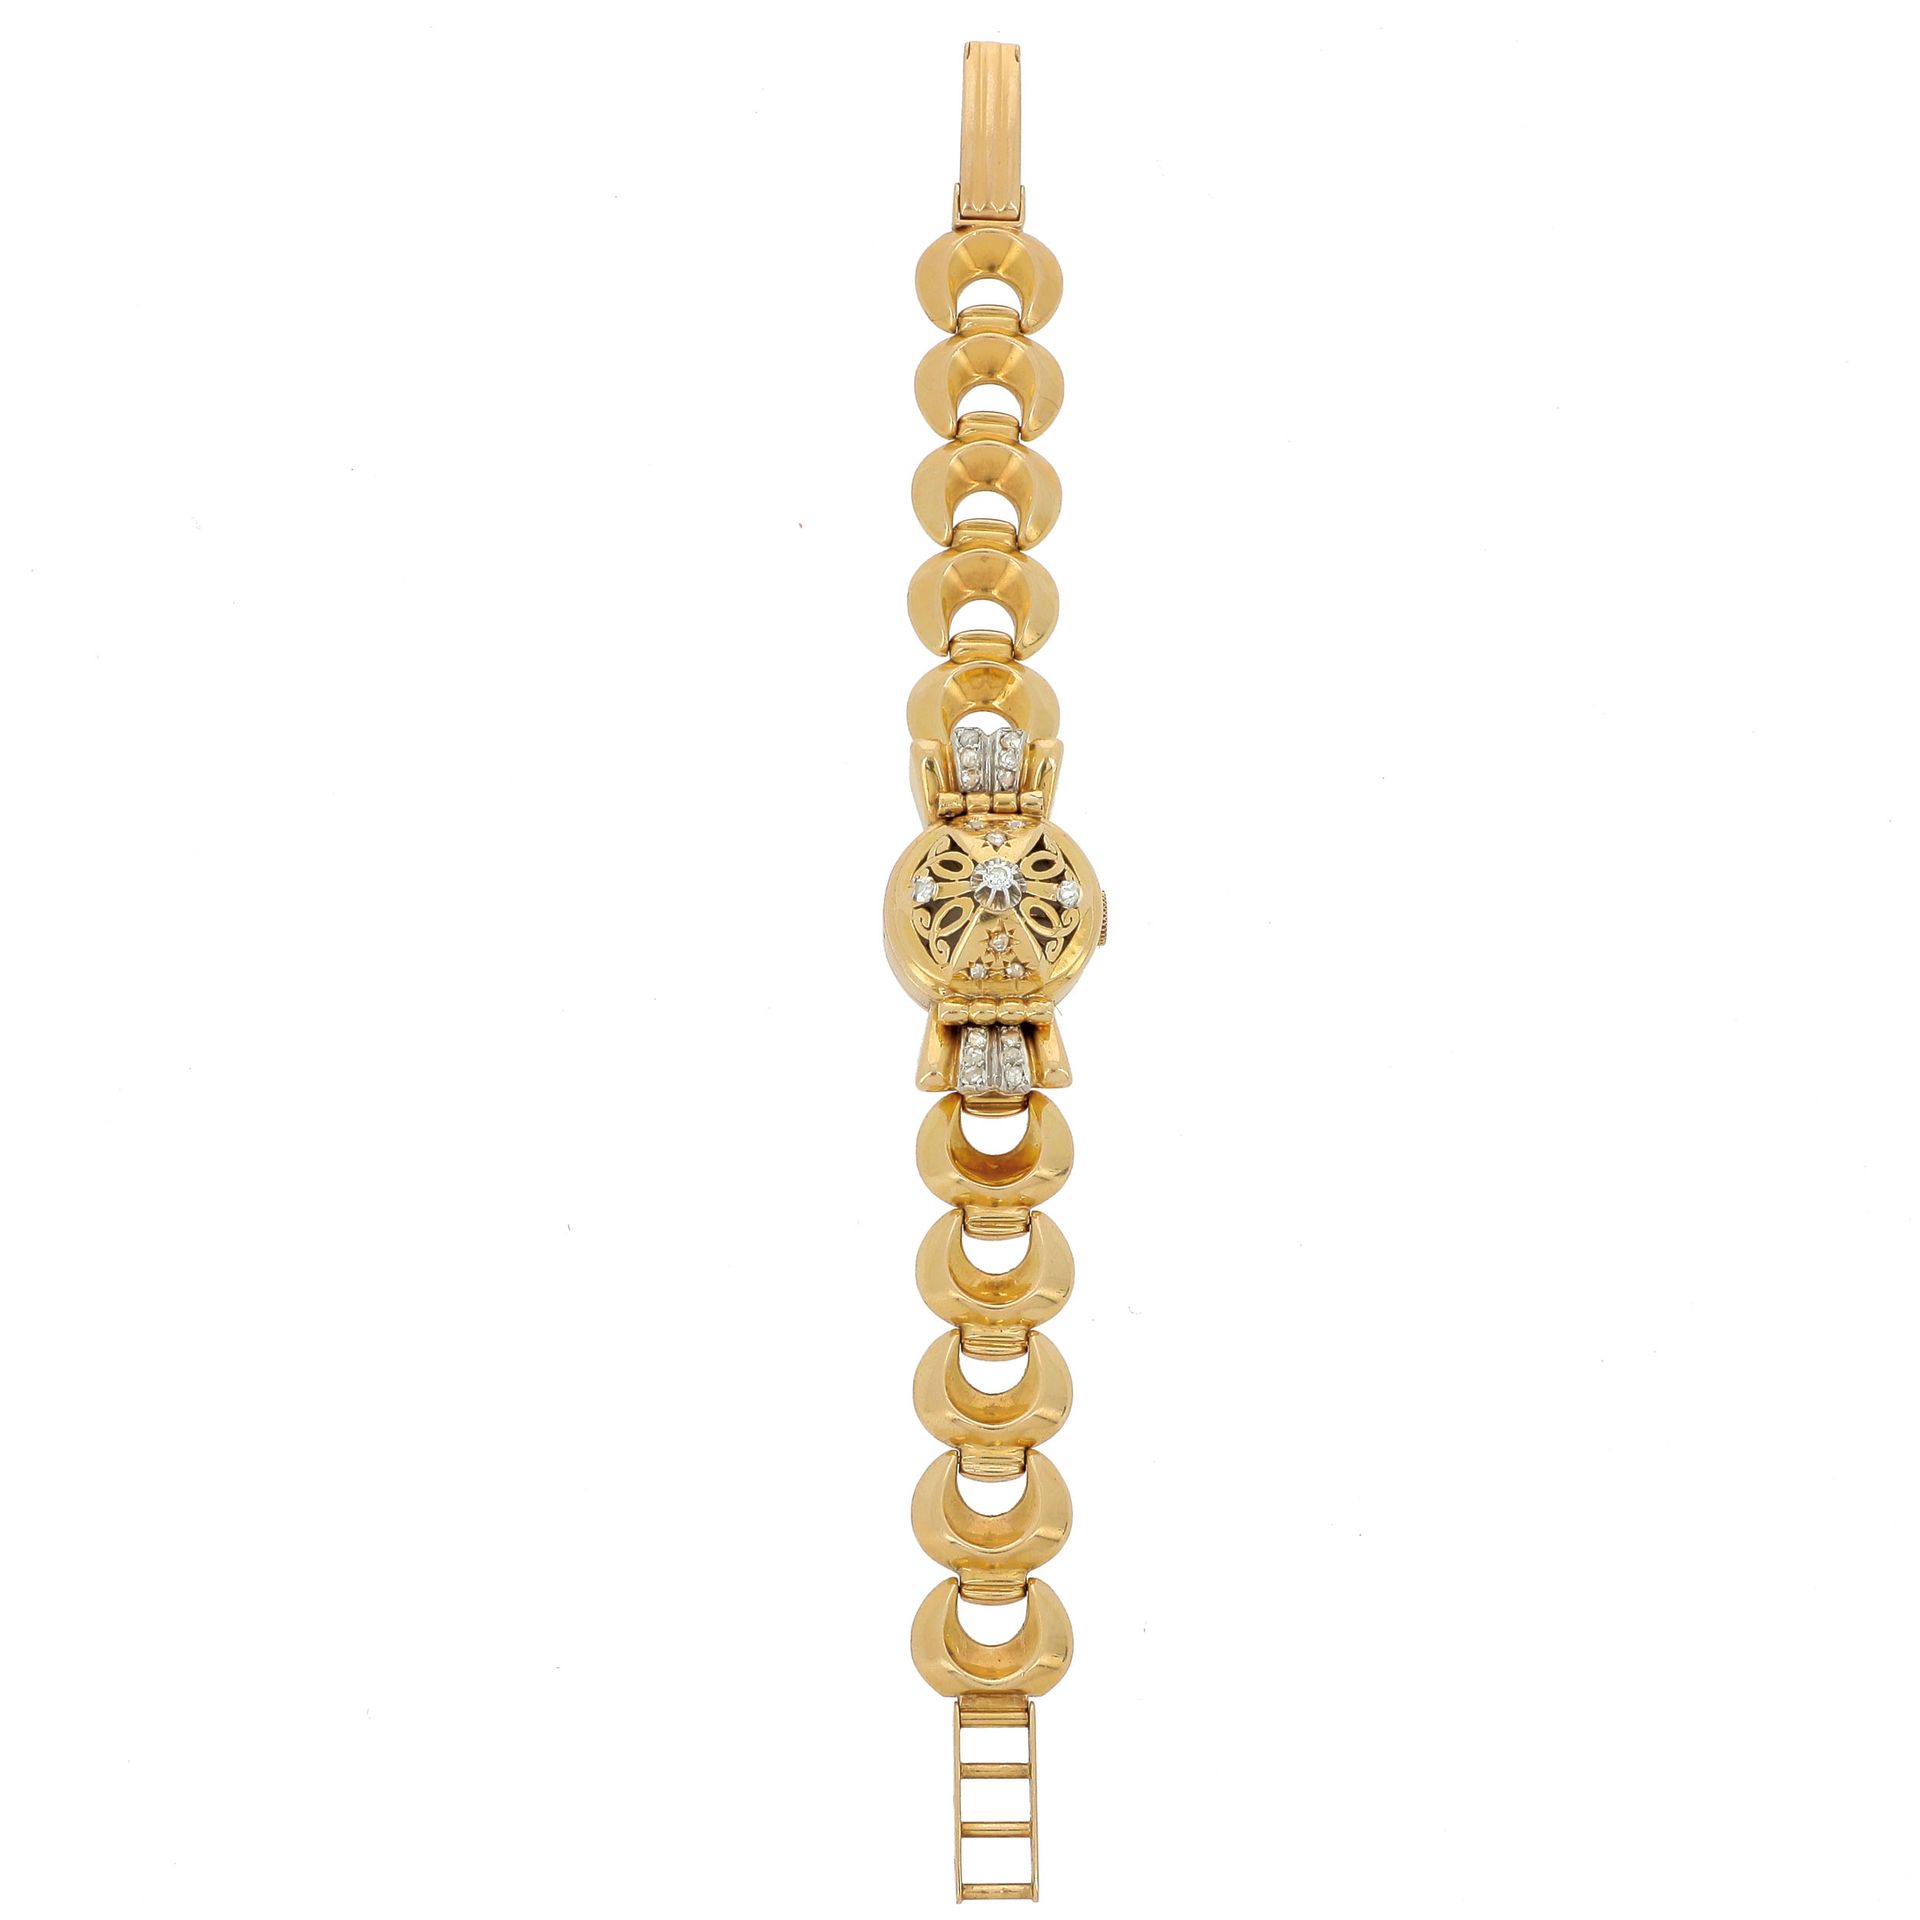 Null BONNET WATCH BRACELET

in yellow gold, the dial signed Elita under a diamon&hellip;